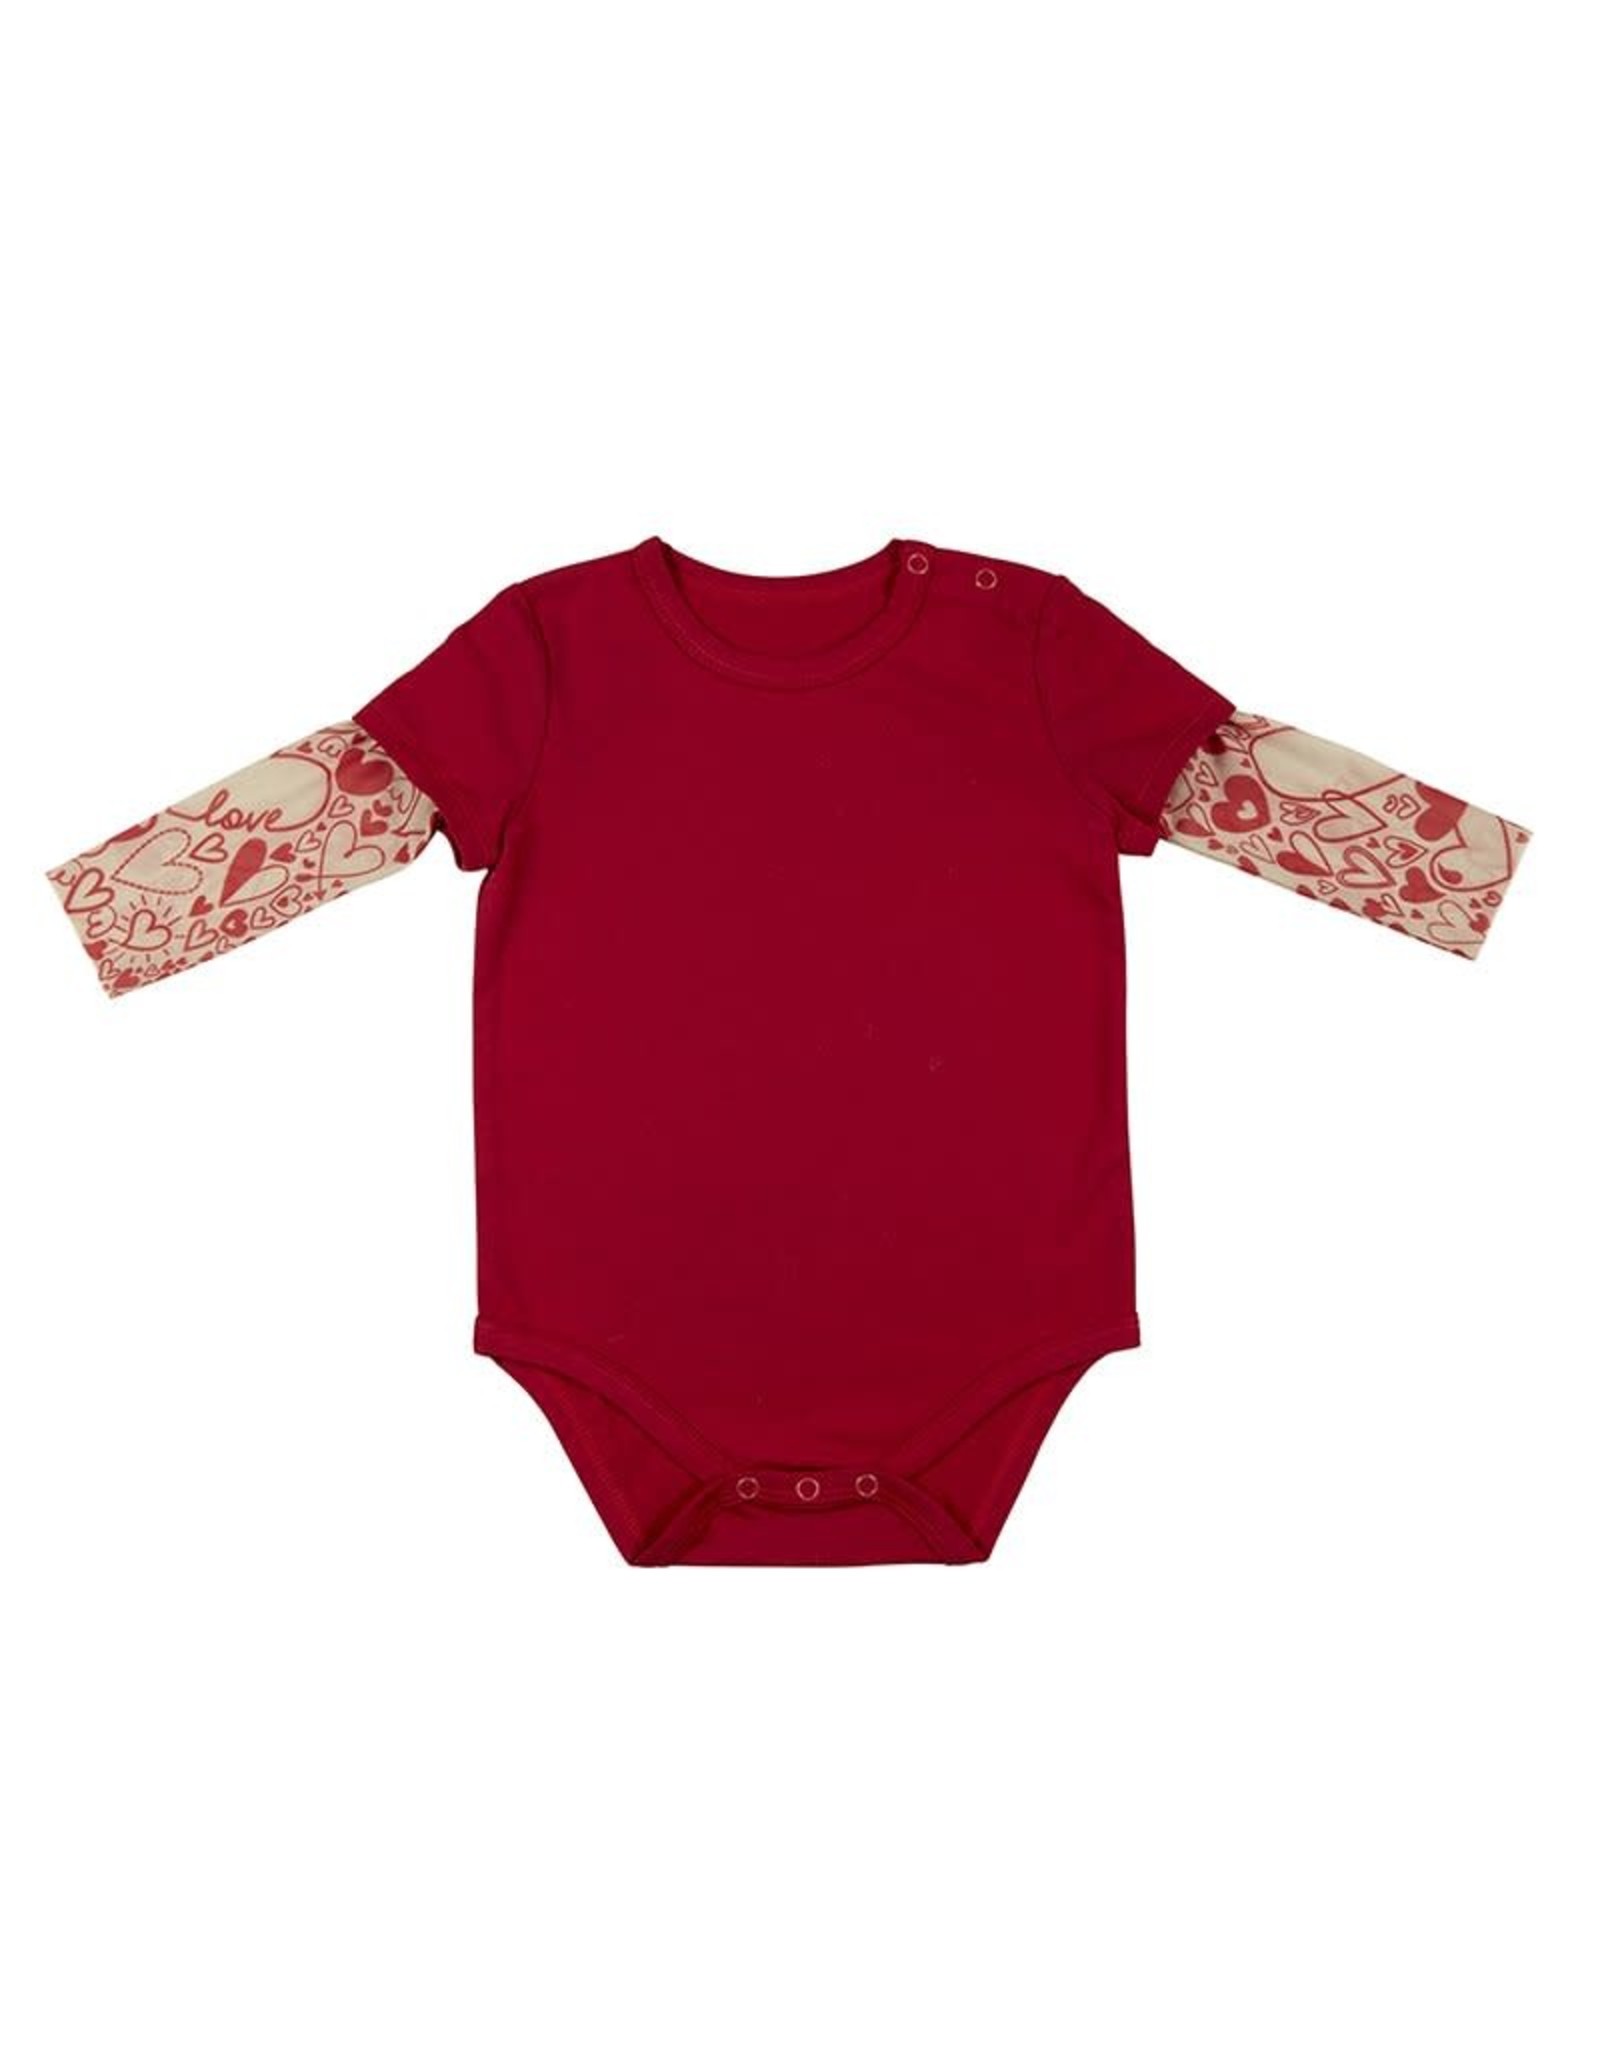 Tattoo Snapshirt Red Hearts Size 6-12 months